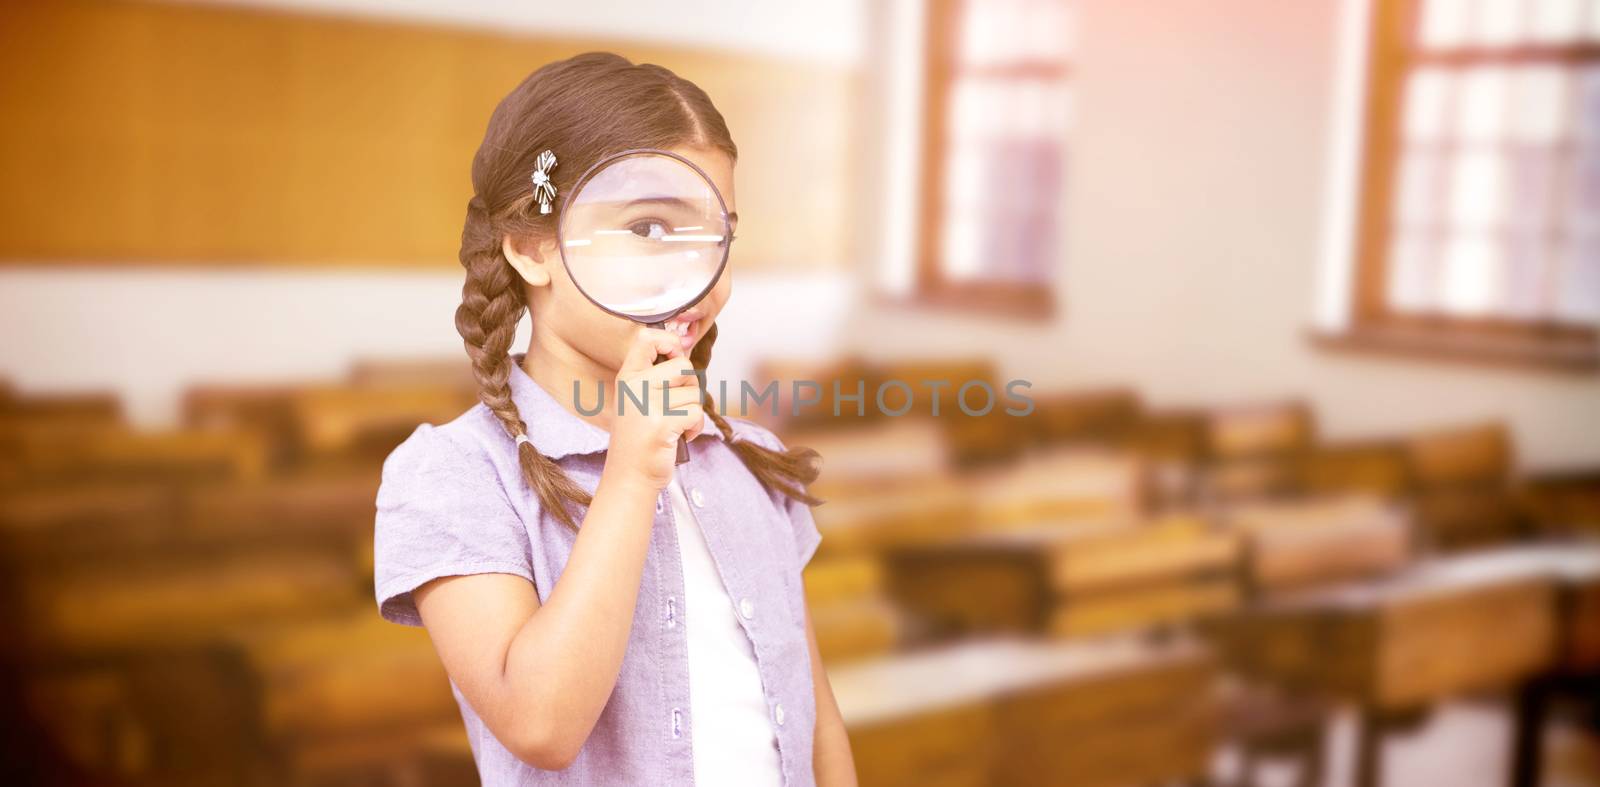 Pupil looking through magnifying glass against empty classroom